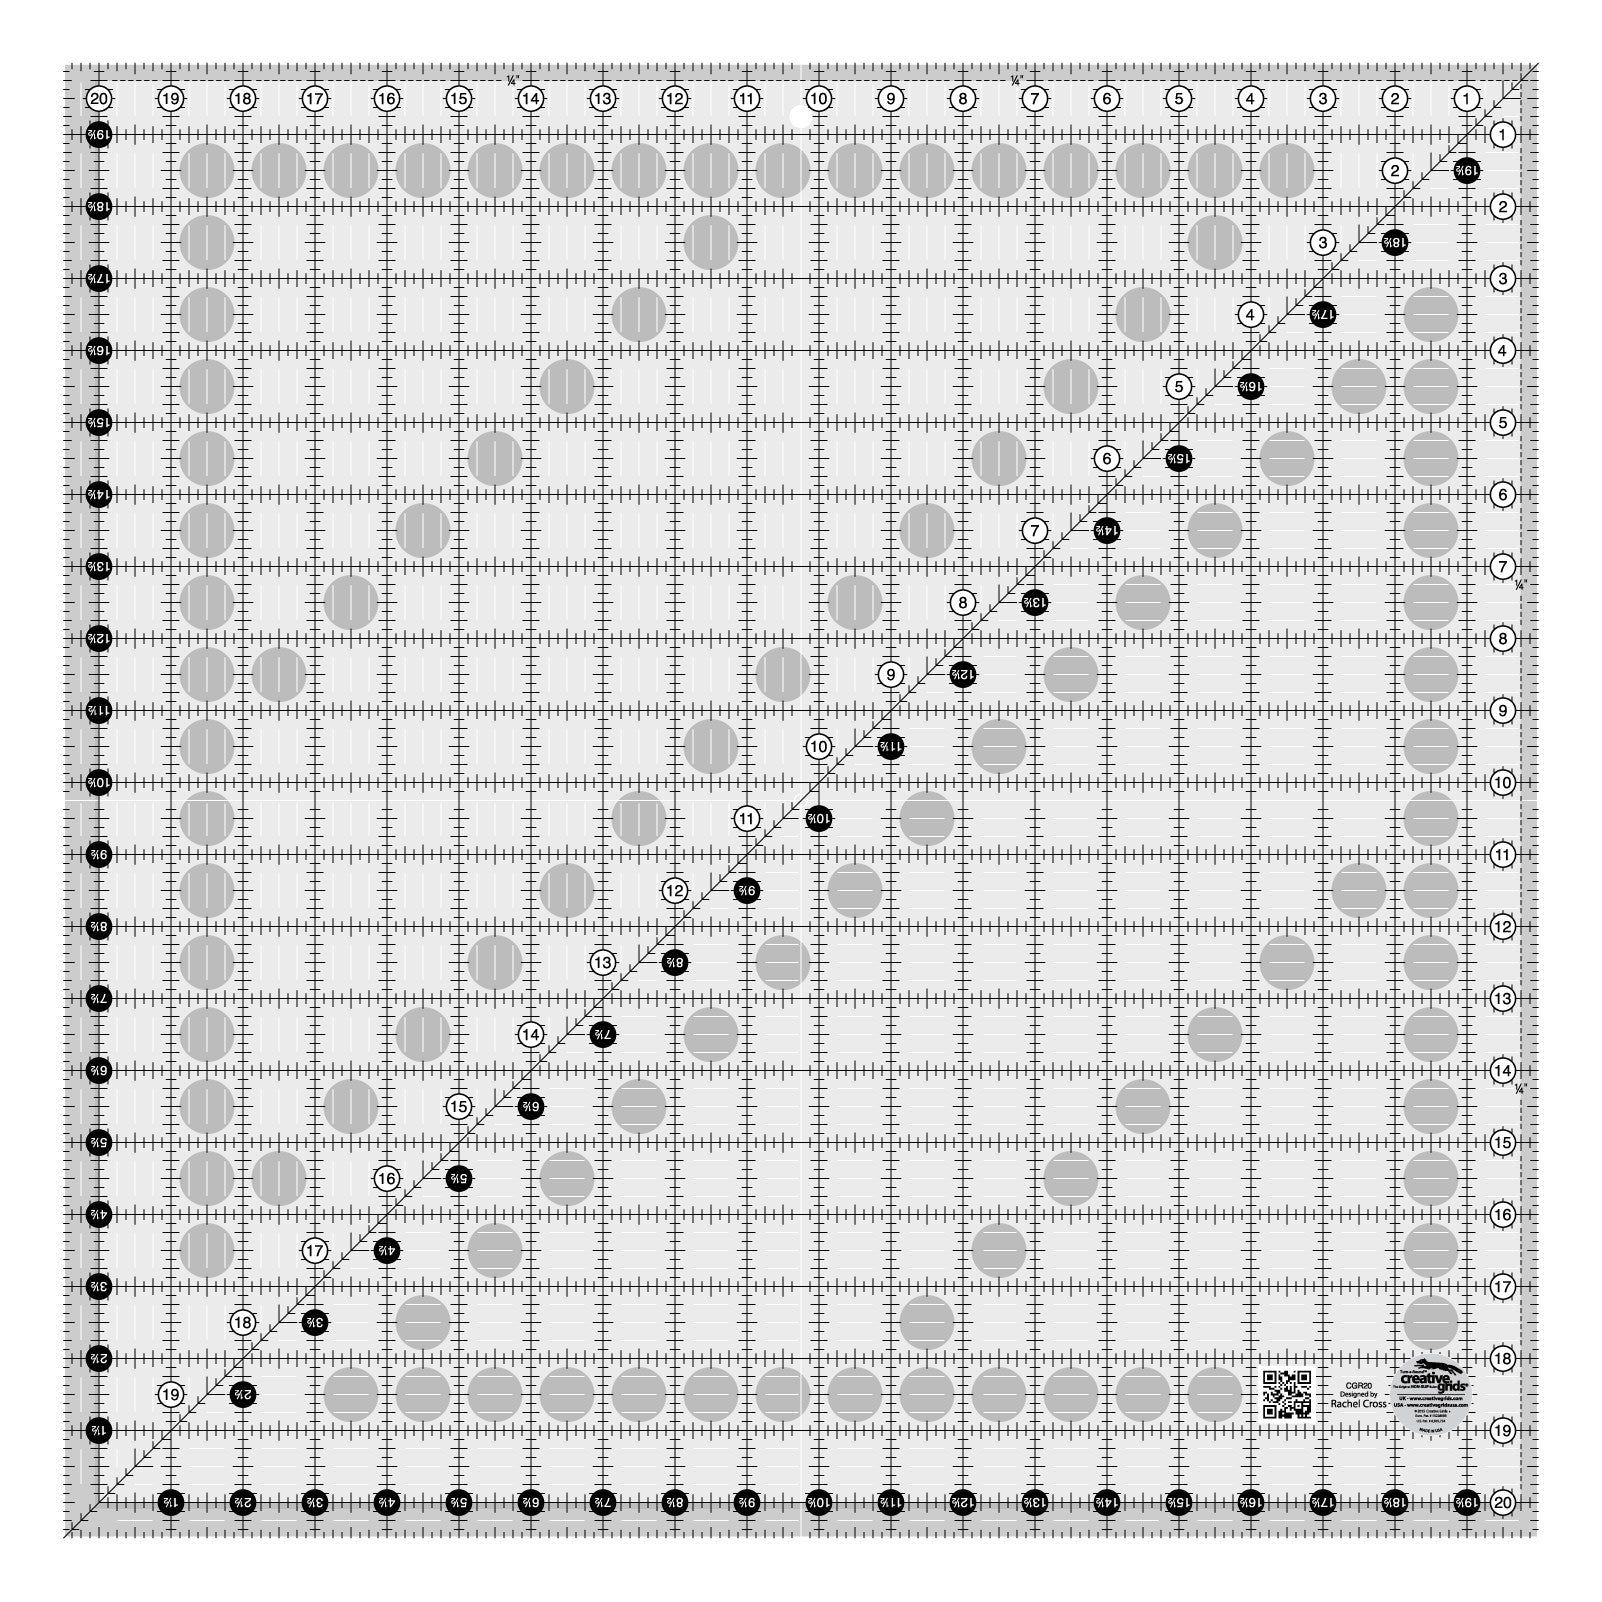 Creative Grids 20-1/2-Inch Square Quilt Ruler (CGR20)